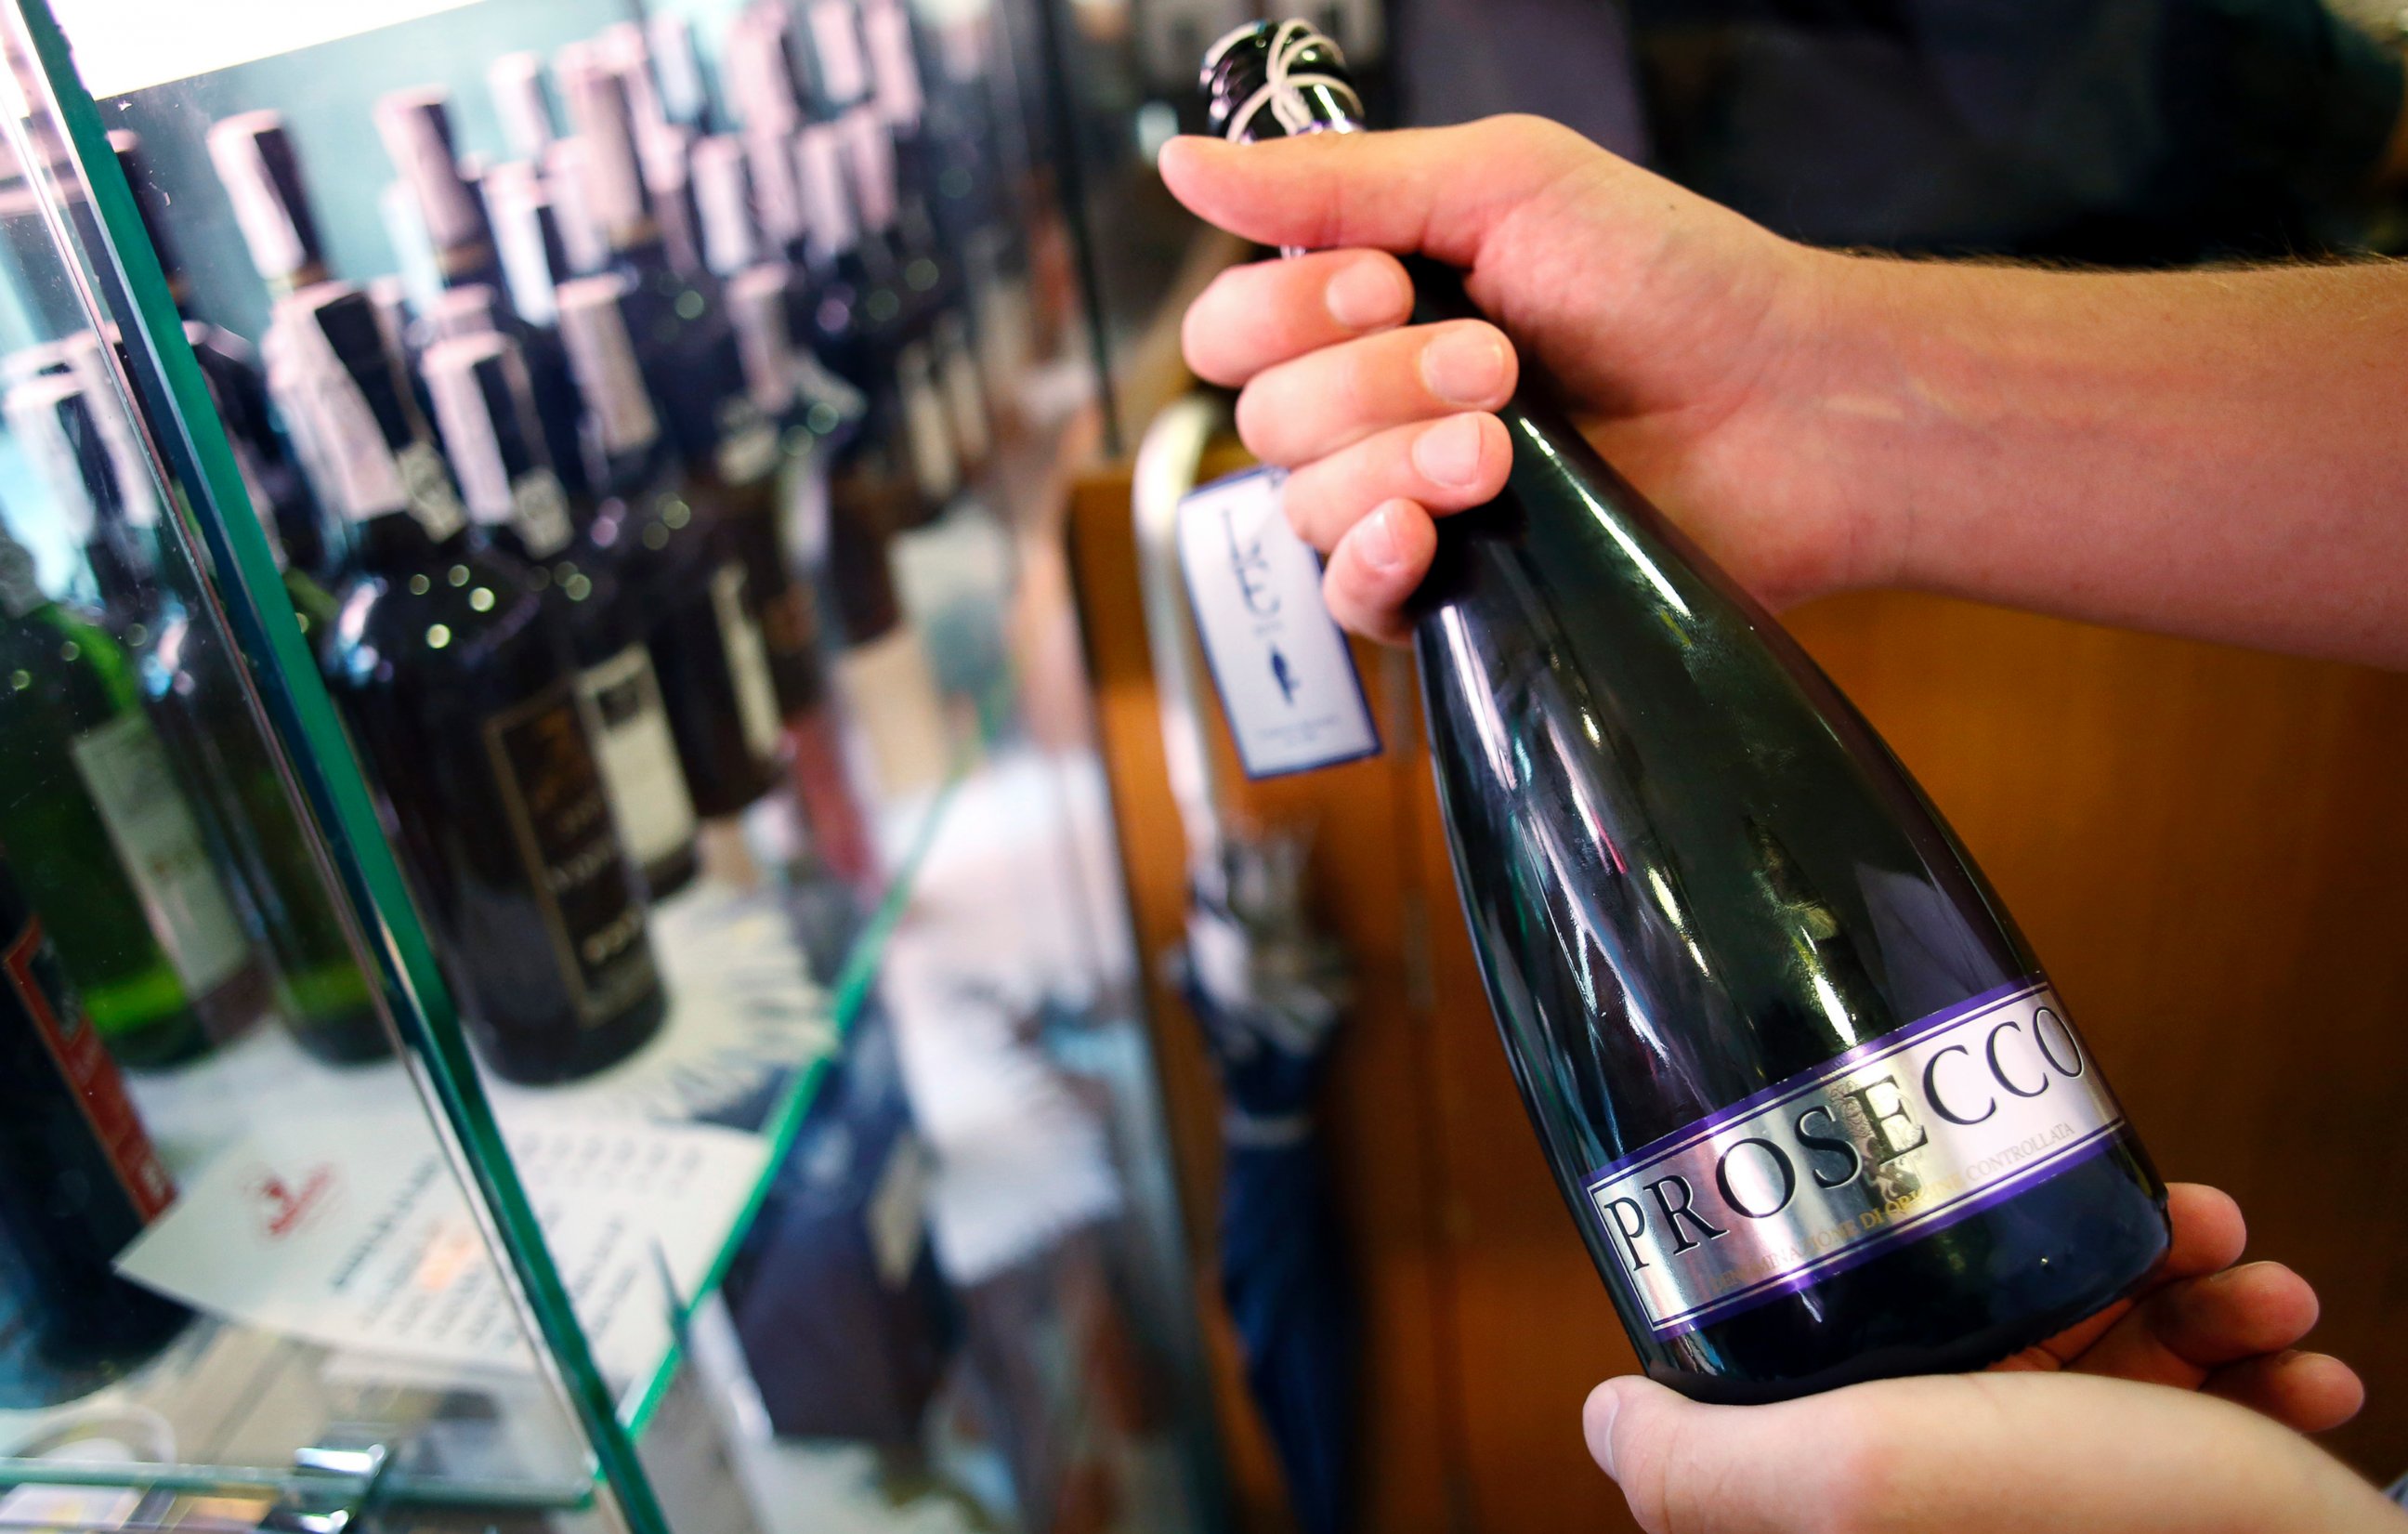 PHOTO: An Italian oenologist checks a bottle of Prosecco wine for authenticity at a food store in Treviso, Italy, Sept. 3, 2013.